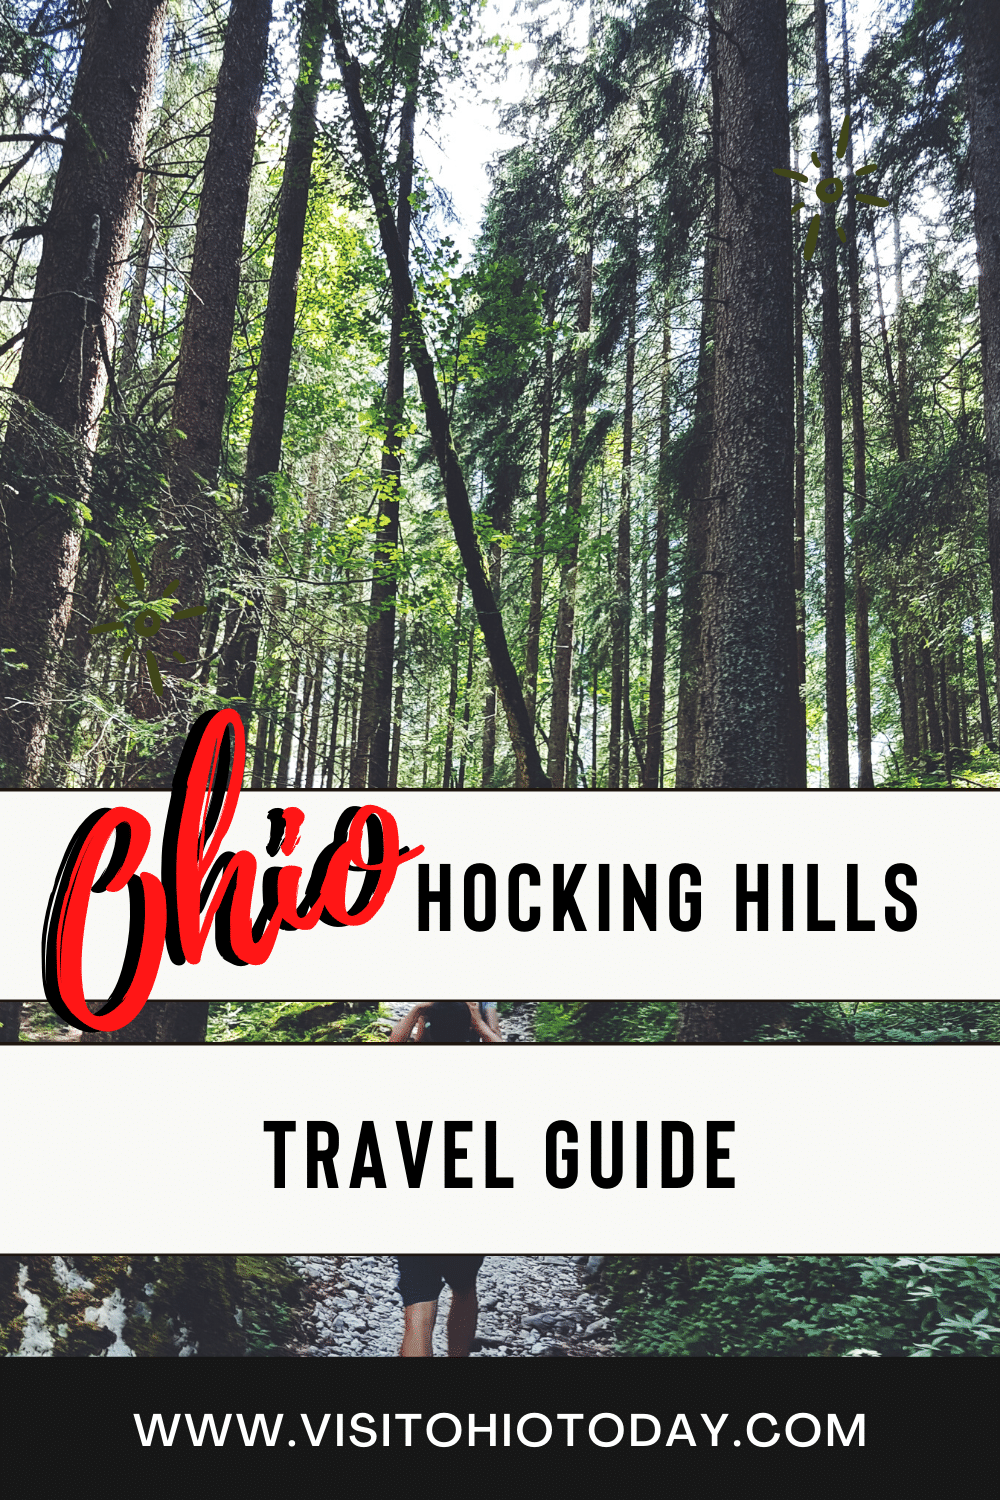 Text: Ohio Hocking Hills Travel Guide with picture of tall skinny brown trees with green leaves